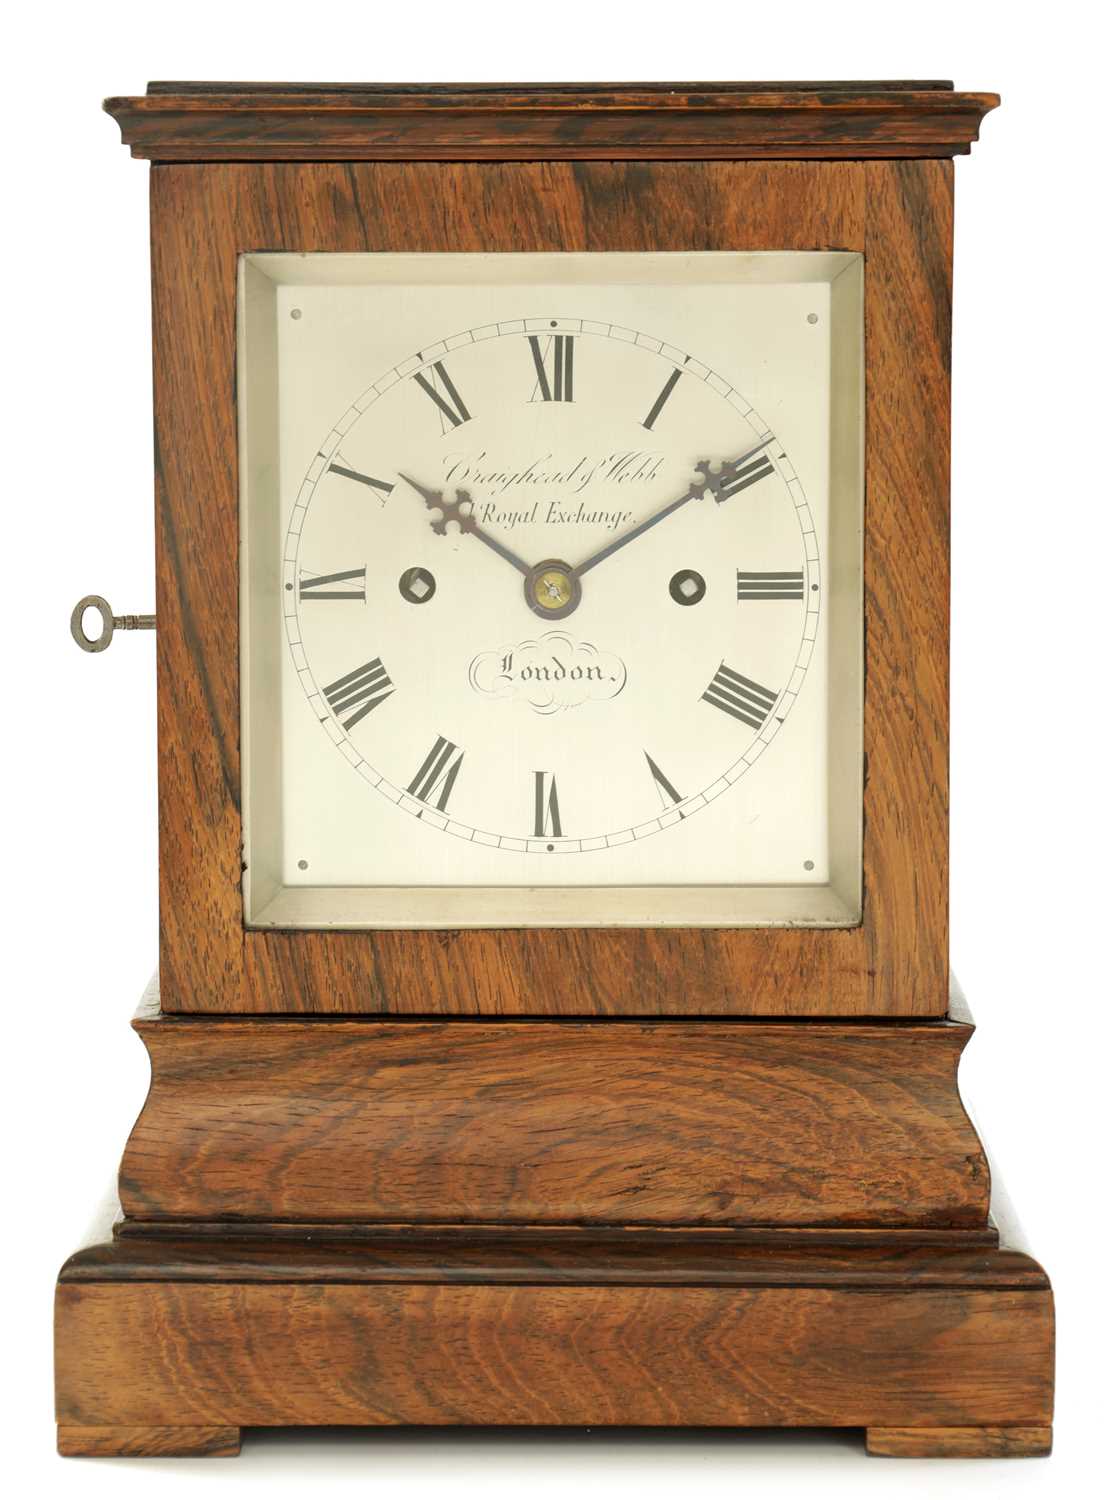 Lot 85 - CRAIGHEAD & WEBB, 1 ROYAL EXCHANGE, LONDON. A MID 19TH CENTURY ROSEWOOD DOUBLE FUSEE FOUR-GLASS MANTEL CLOCK